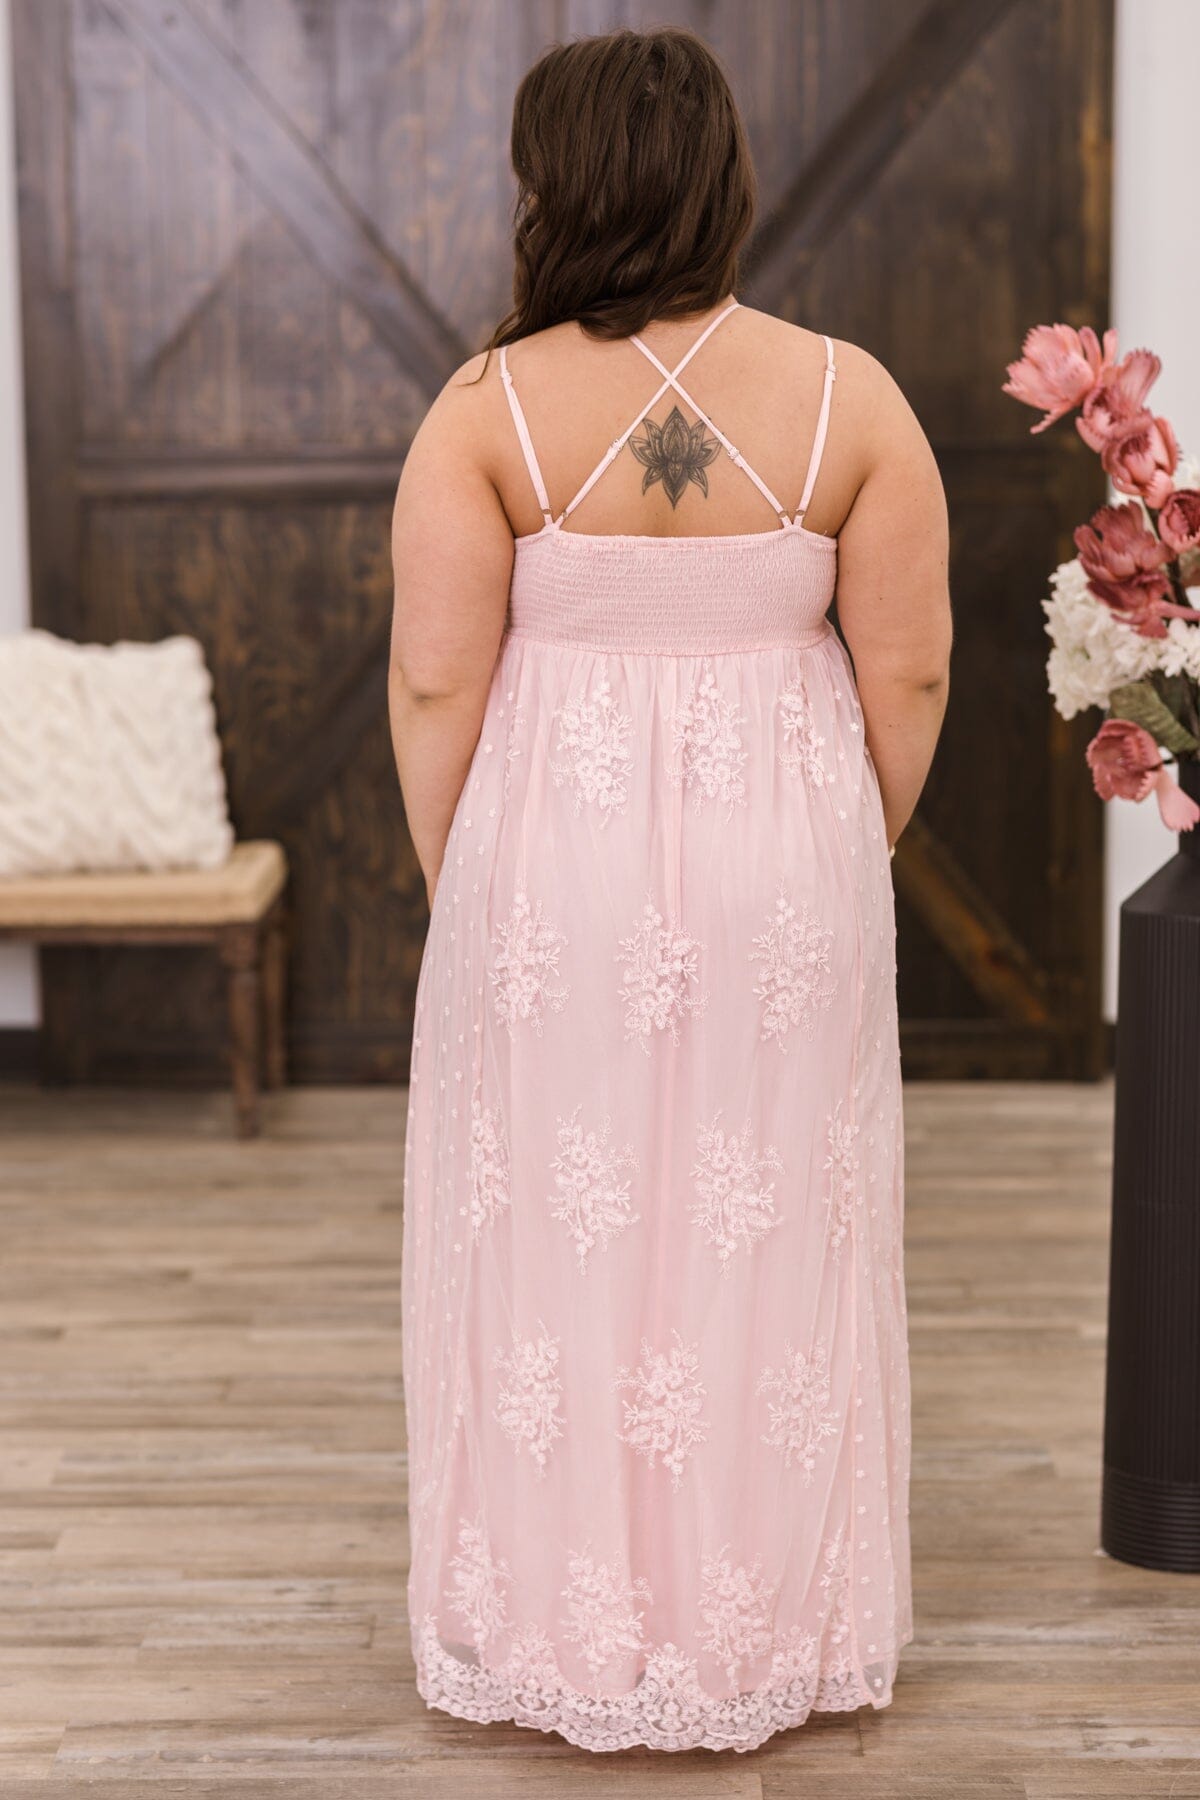 Dusty Rose Crochet Lace Bodice Maxi Dress - Filly Flair